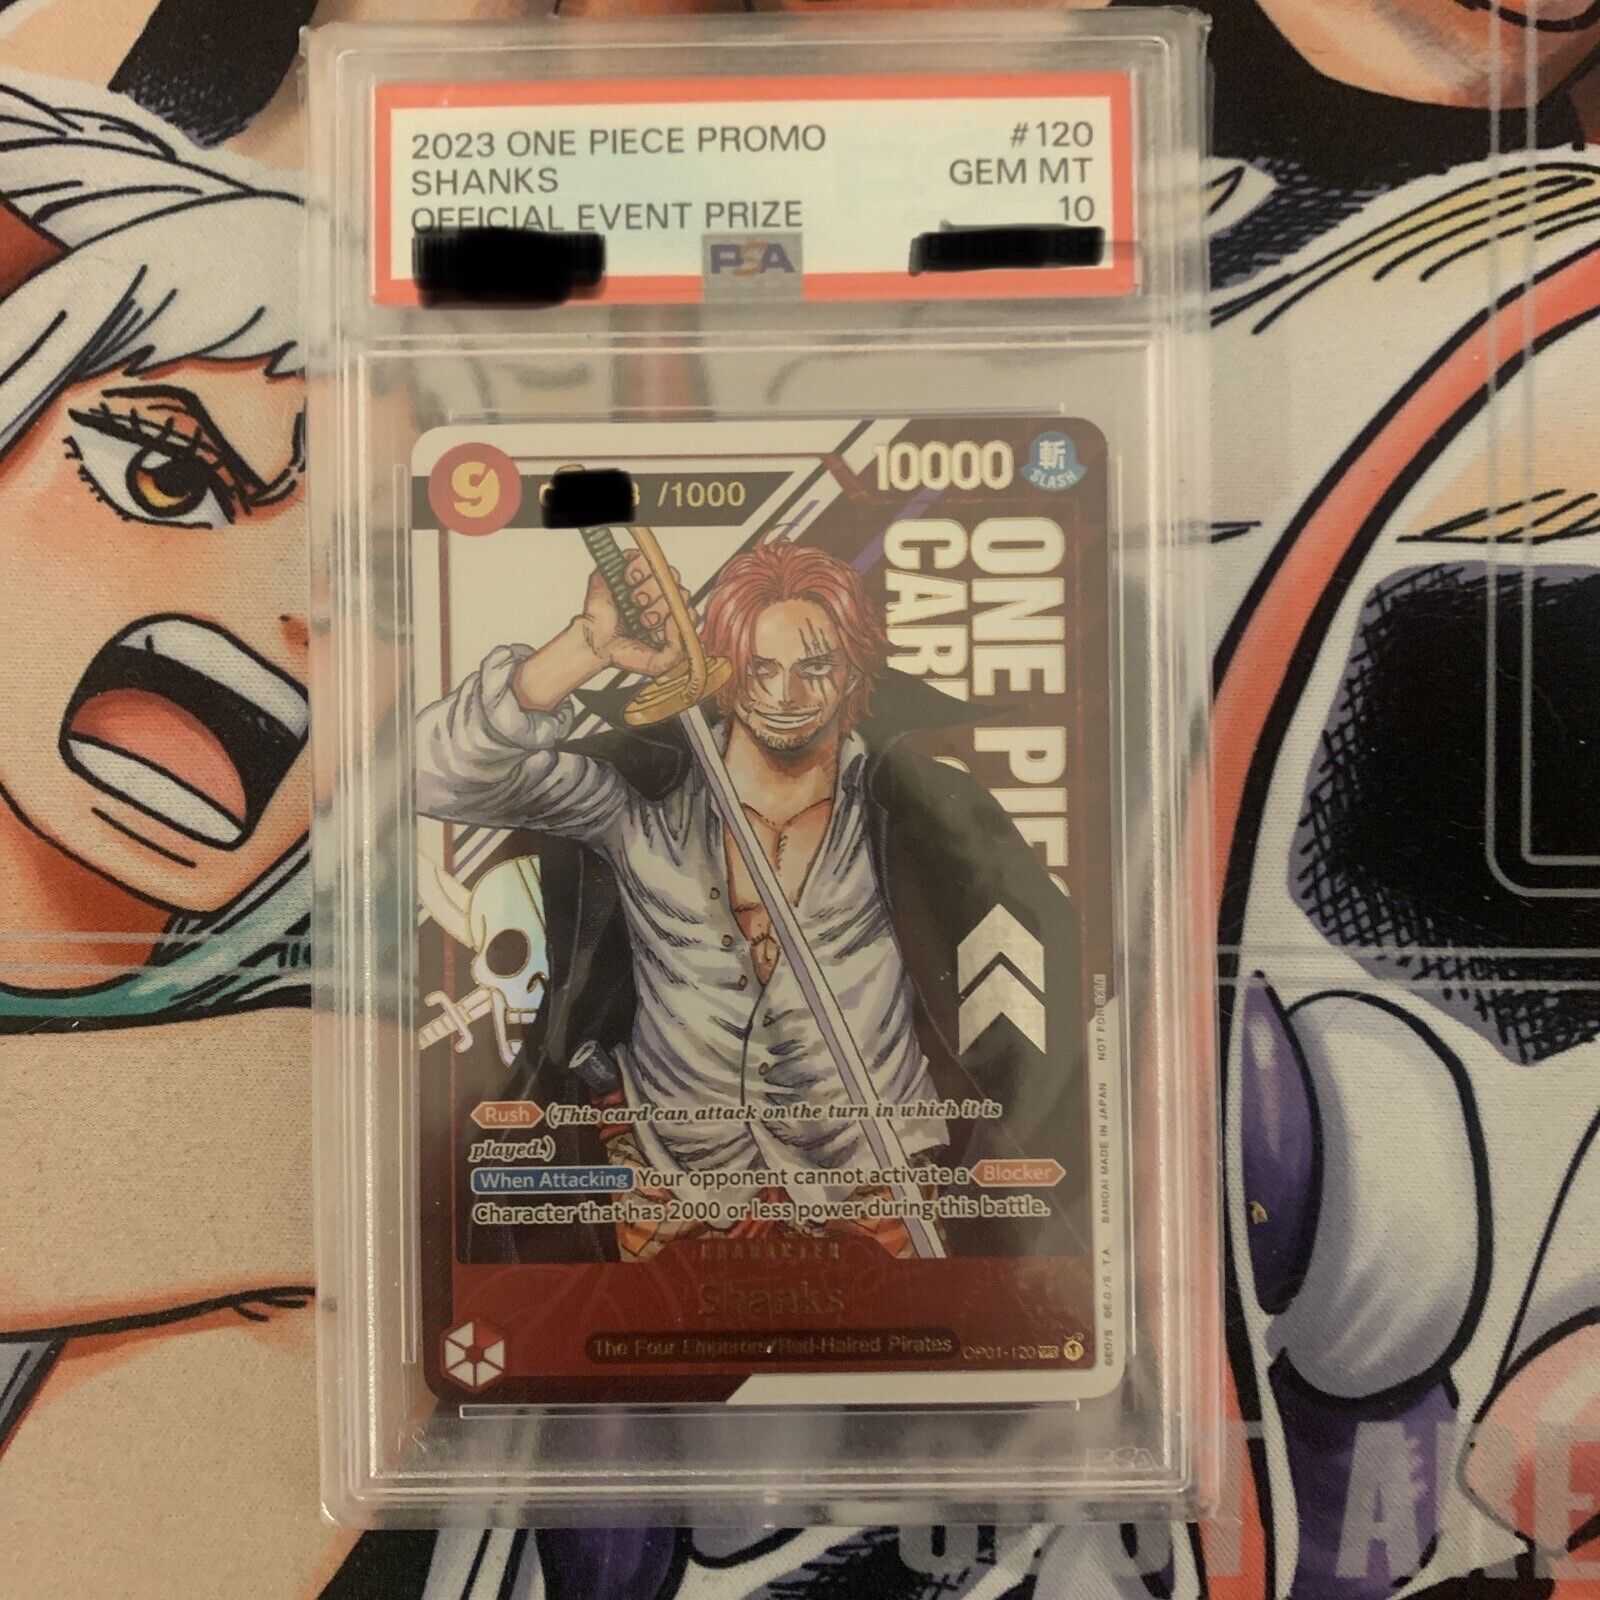 One Piece Serialized Shanks Promo English PSA 10 - Serial is Within 150-175